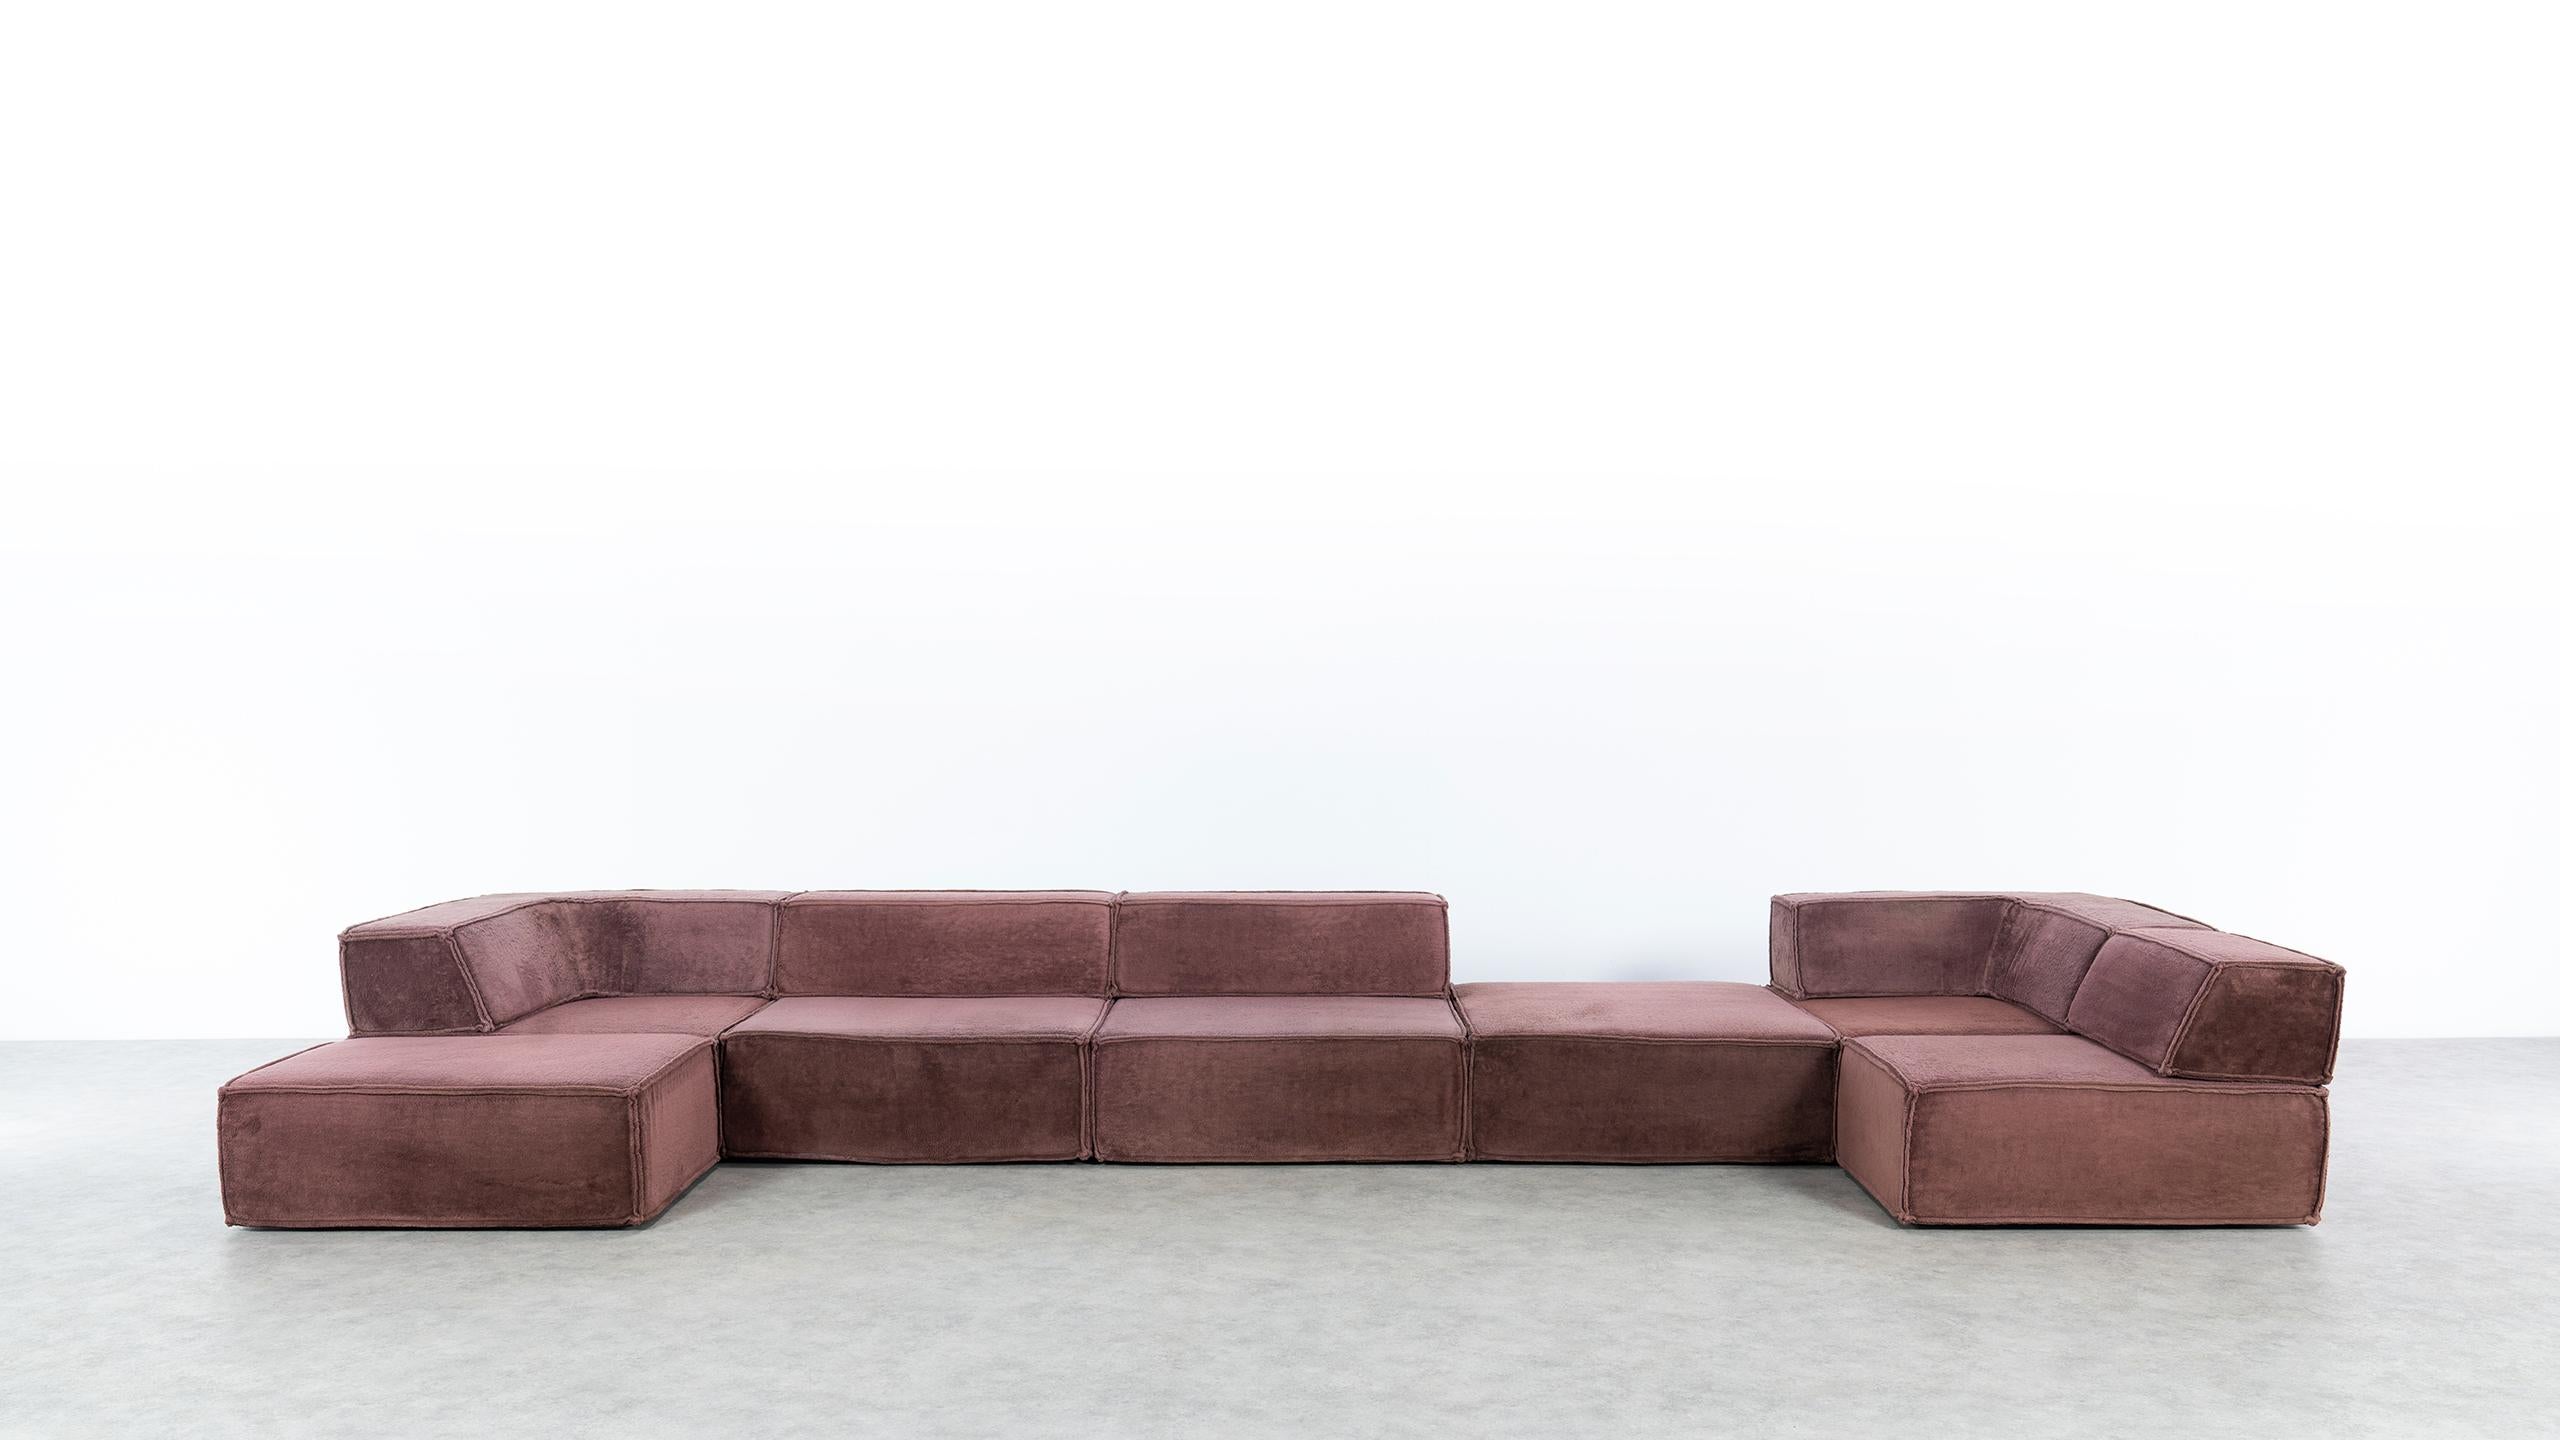 The modular sofa system, which was created in 1972 by Team Form AG in Switzerland for COR, blends seamlessly into any environment. 
Taking the backrest away it can also be used as a very comfortable bed.

The double outer seam lends trio an